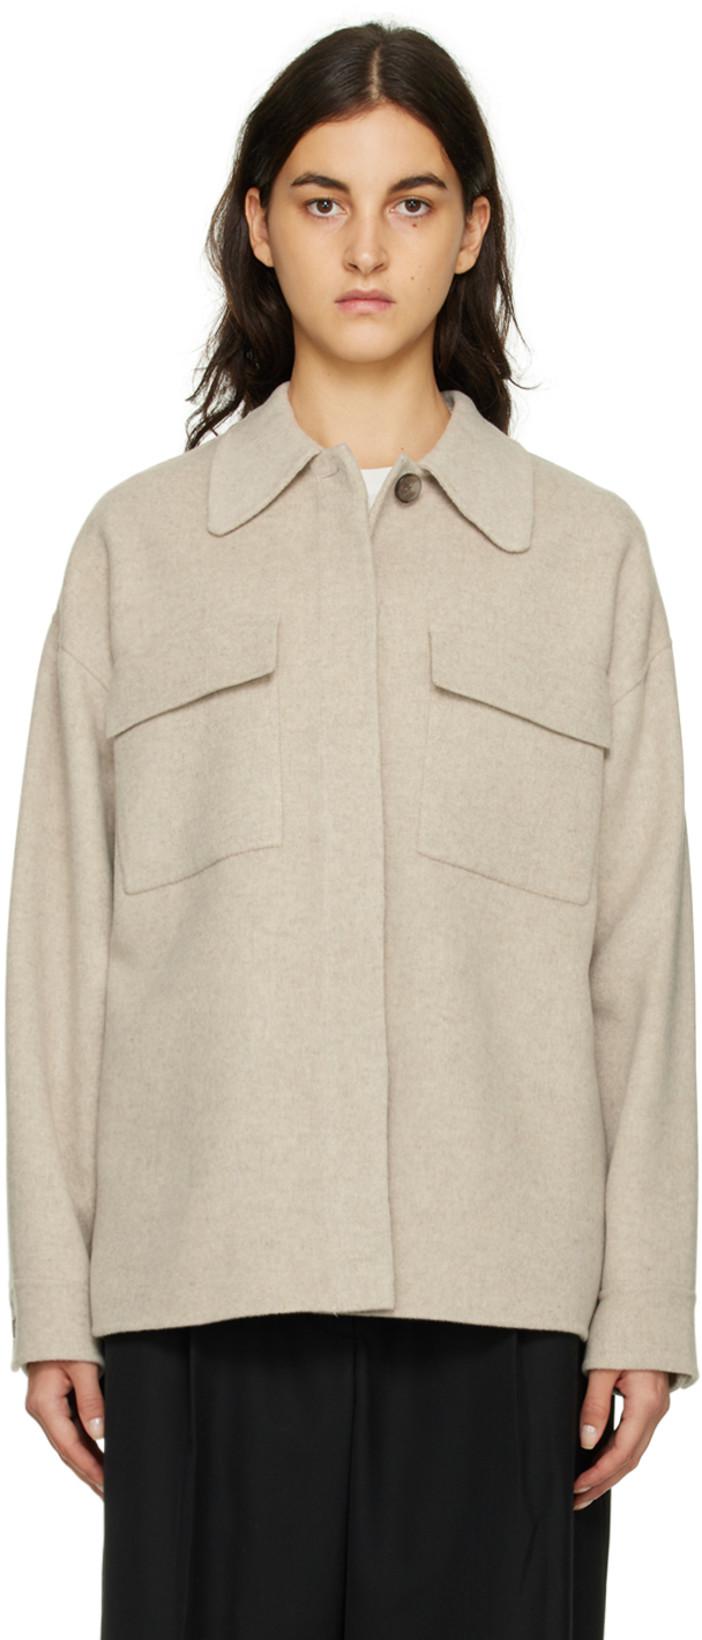 Gray Utility Shirt Jacket by 3.1 PHILLIP LIM